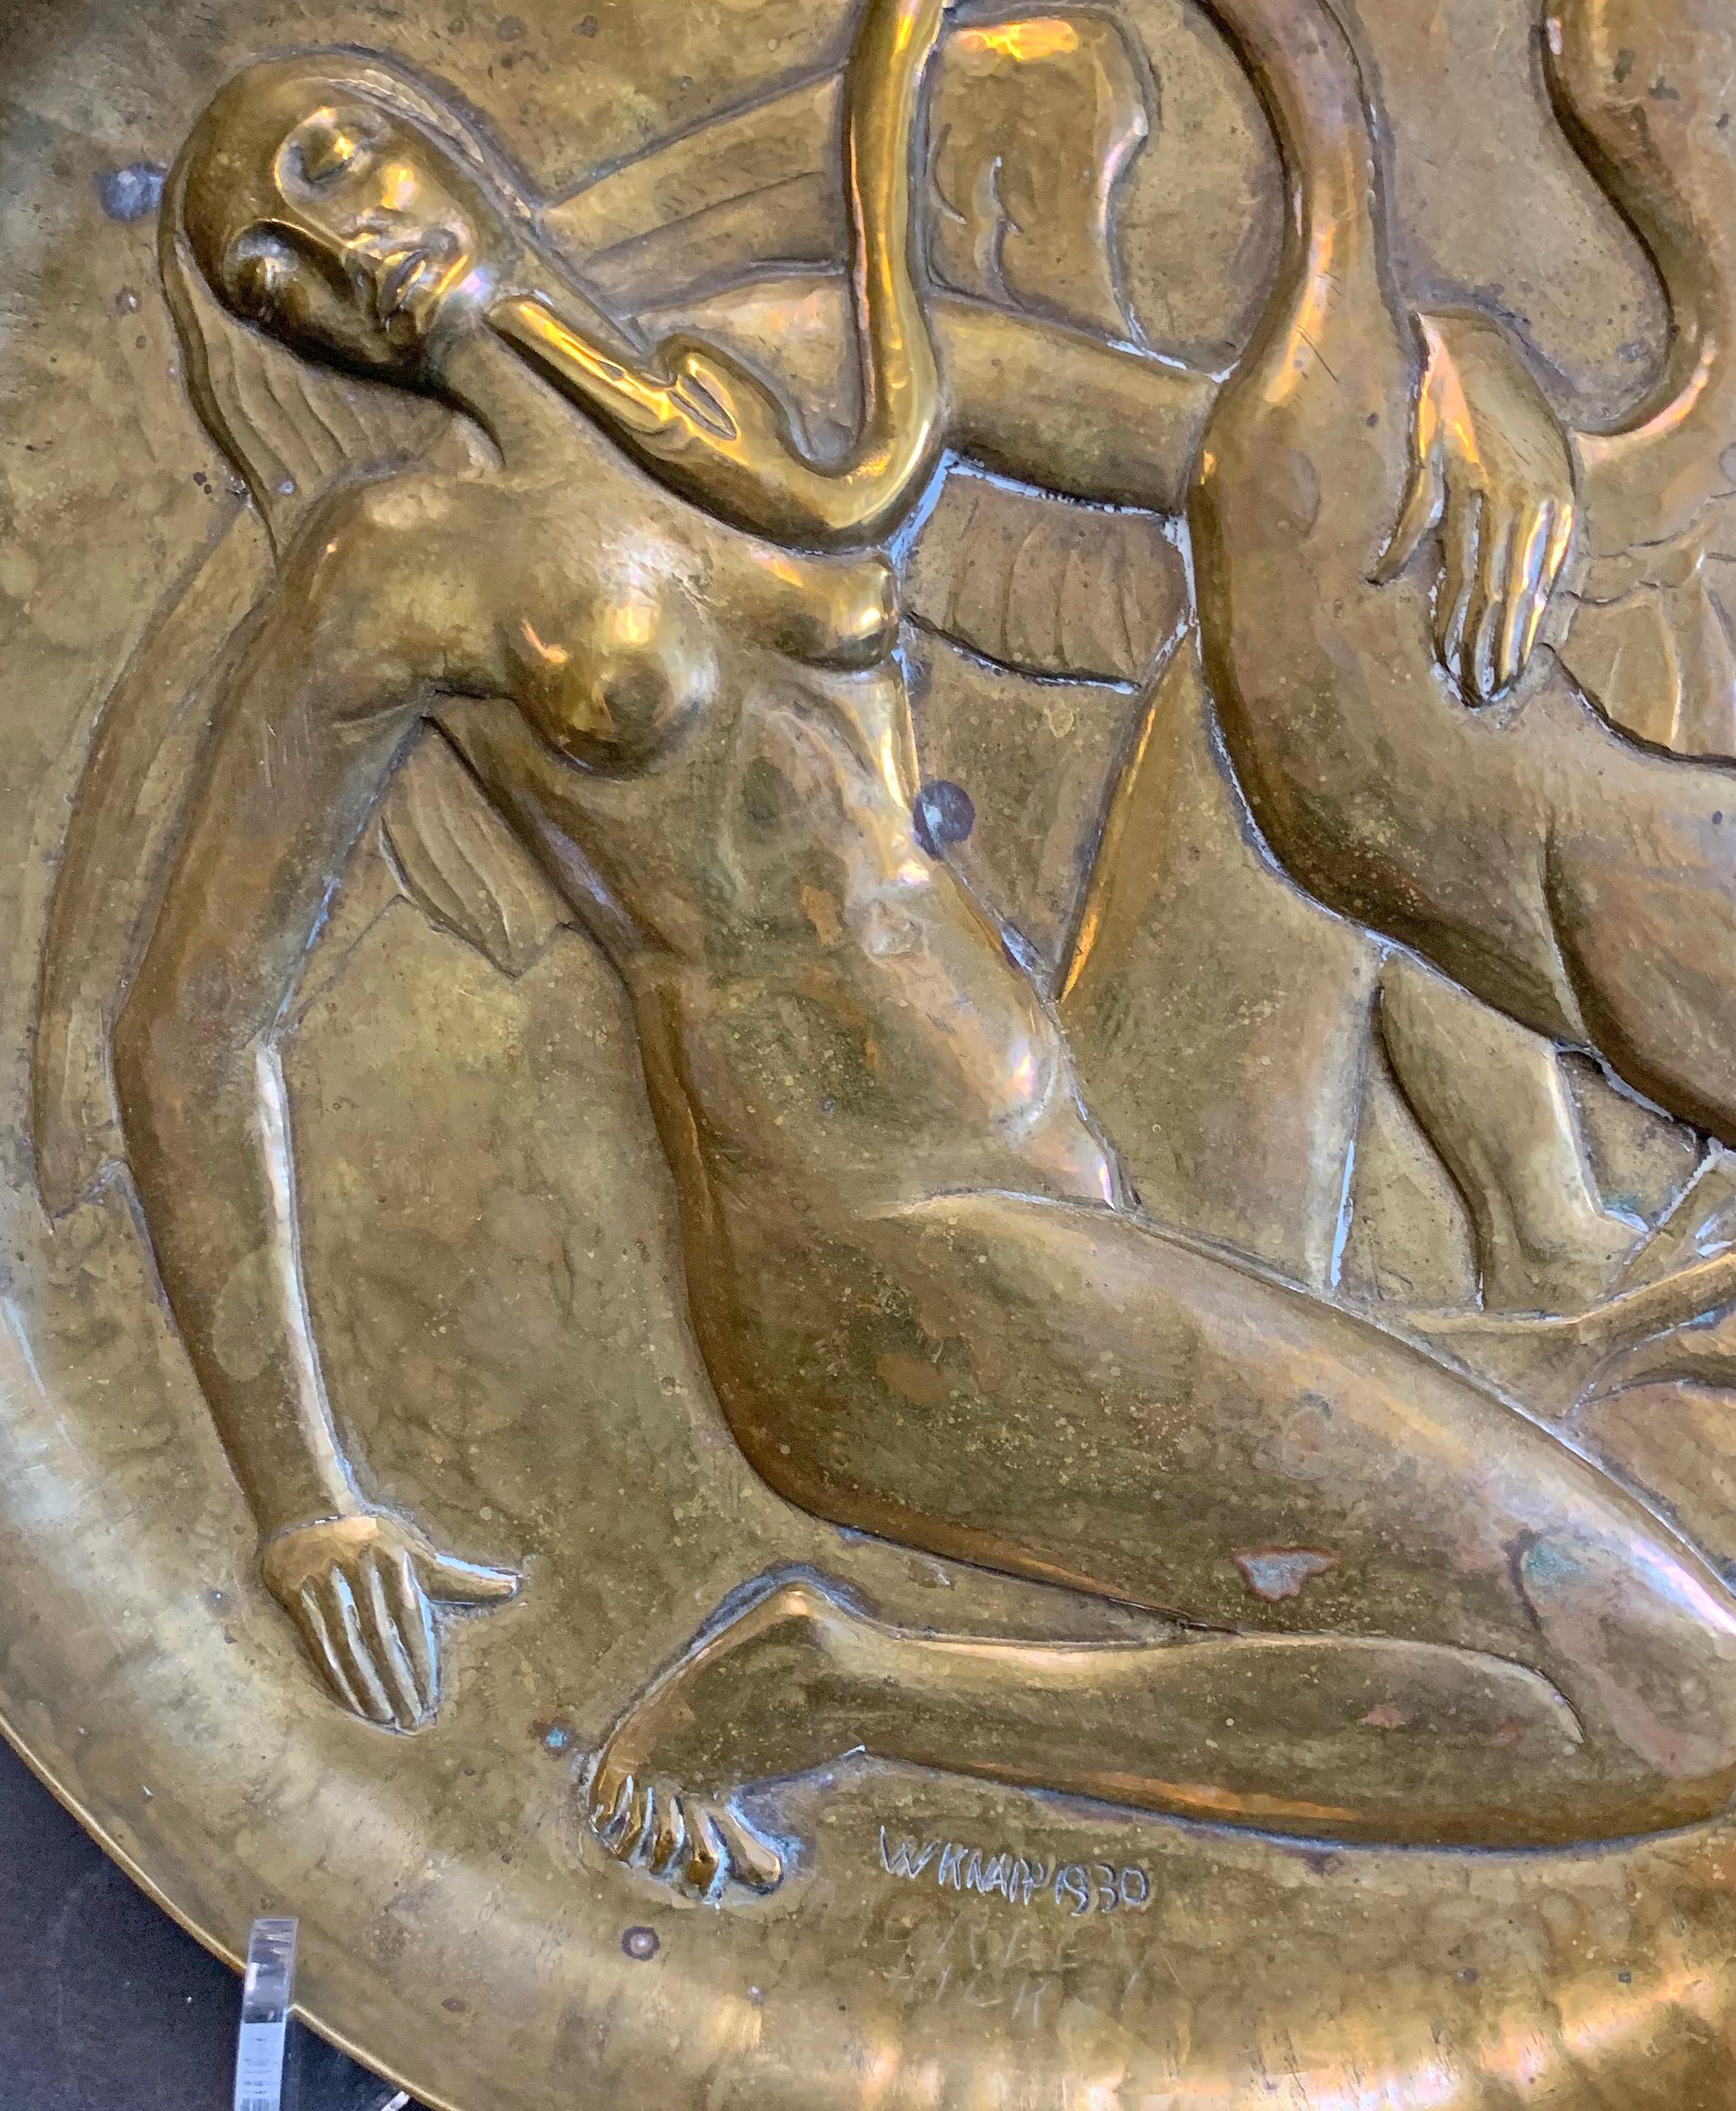 One of the finest repoussé bronze sculptures we have ever offered, this high style Art Deco bas relief rondel was made in 1930 by Willi Knapp. Knapp was born in Germany and came to America at age 22, first working in Chicago before settling in